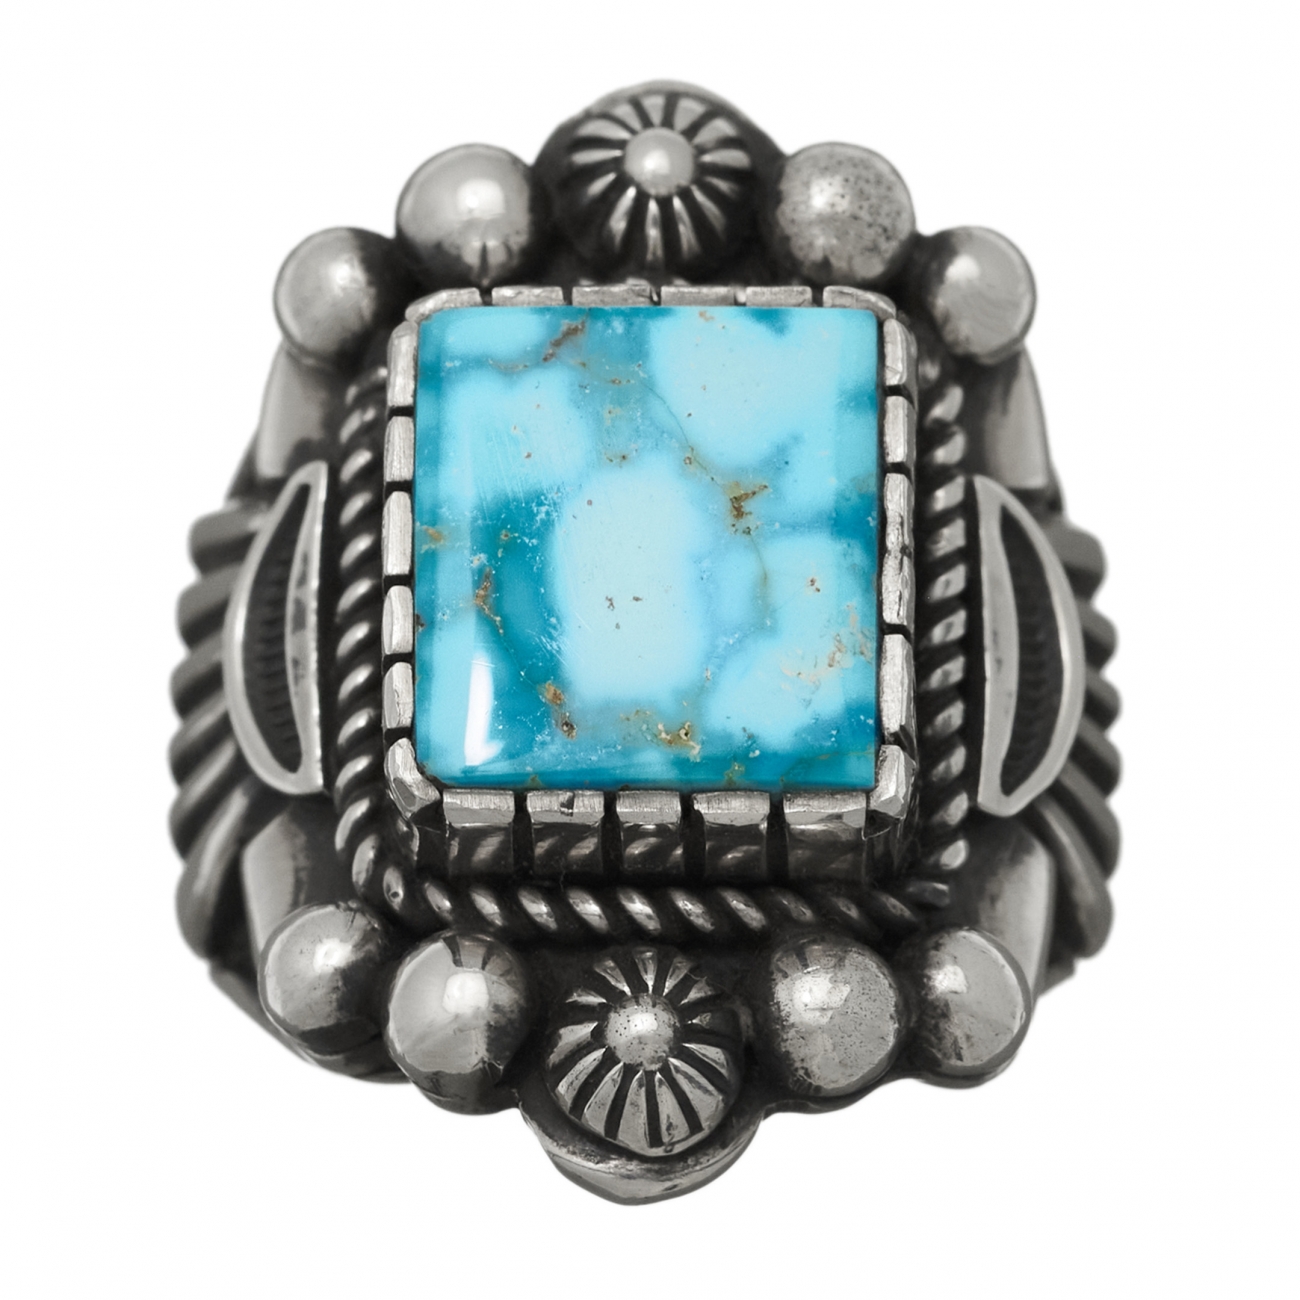 Navajo ring for men BA1127 in turquoise and silver - Harpo Paris